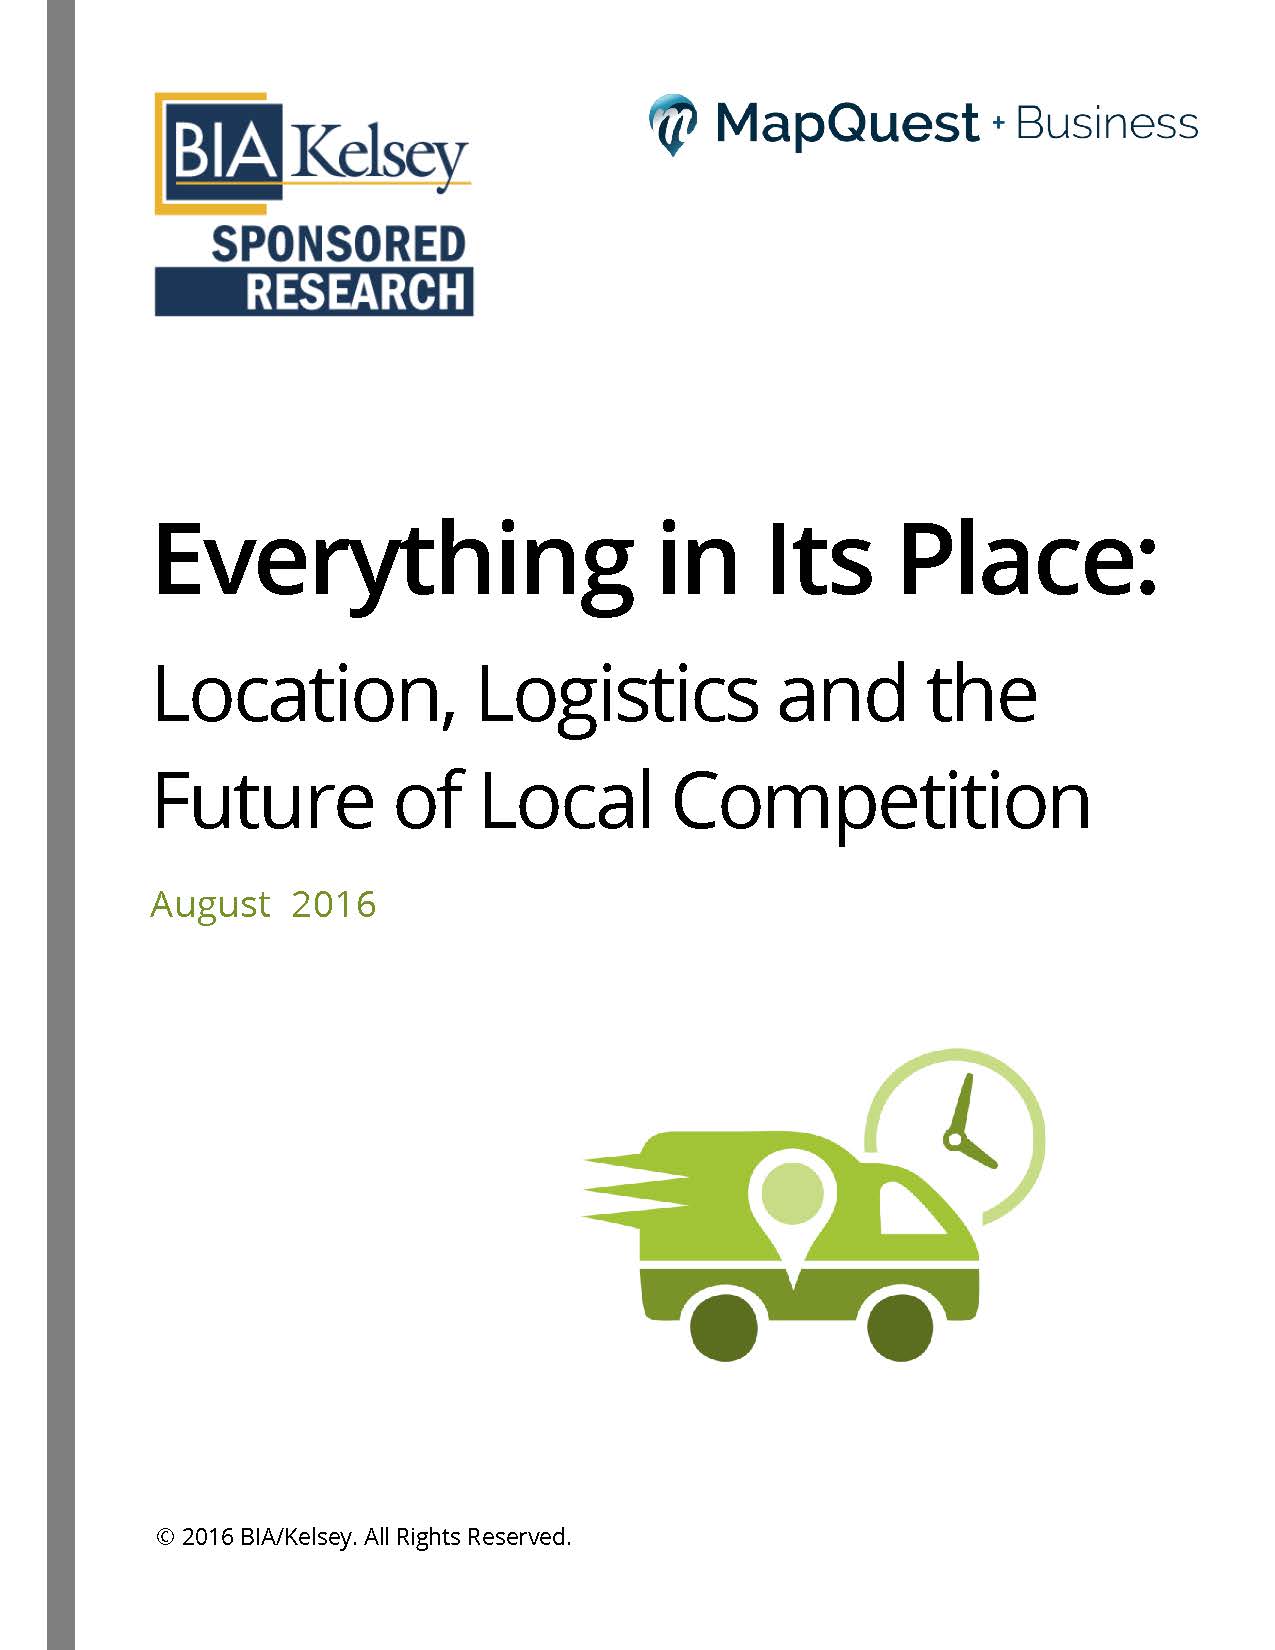 MapQuest & BIA/Kelsey Release “Everything In Its Place: Location, Logistics and the Future of Local Competition